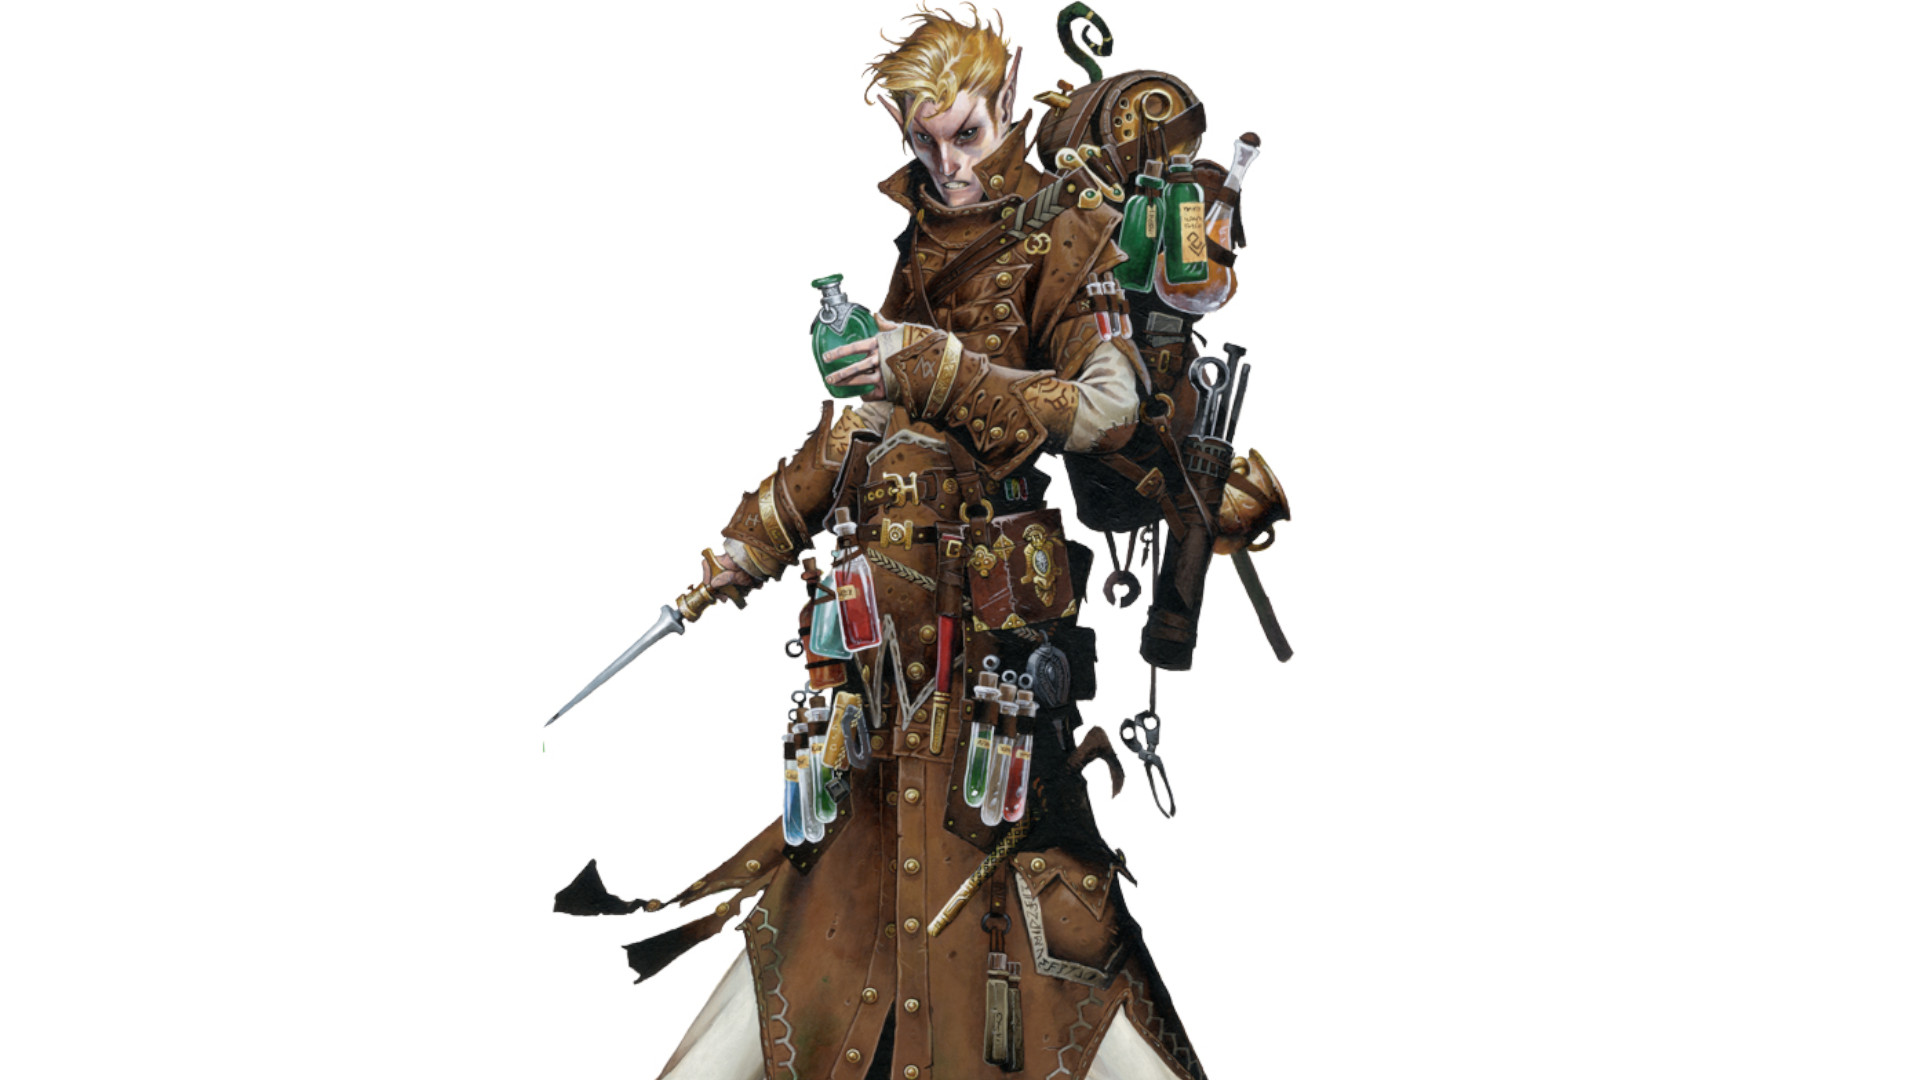 Are Alchemists too weak in Pathfinder 2e? We explore that in a